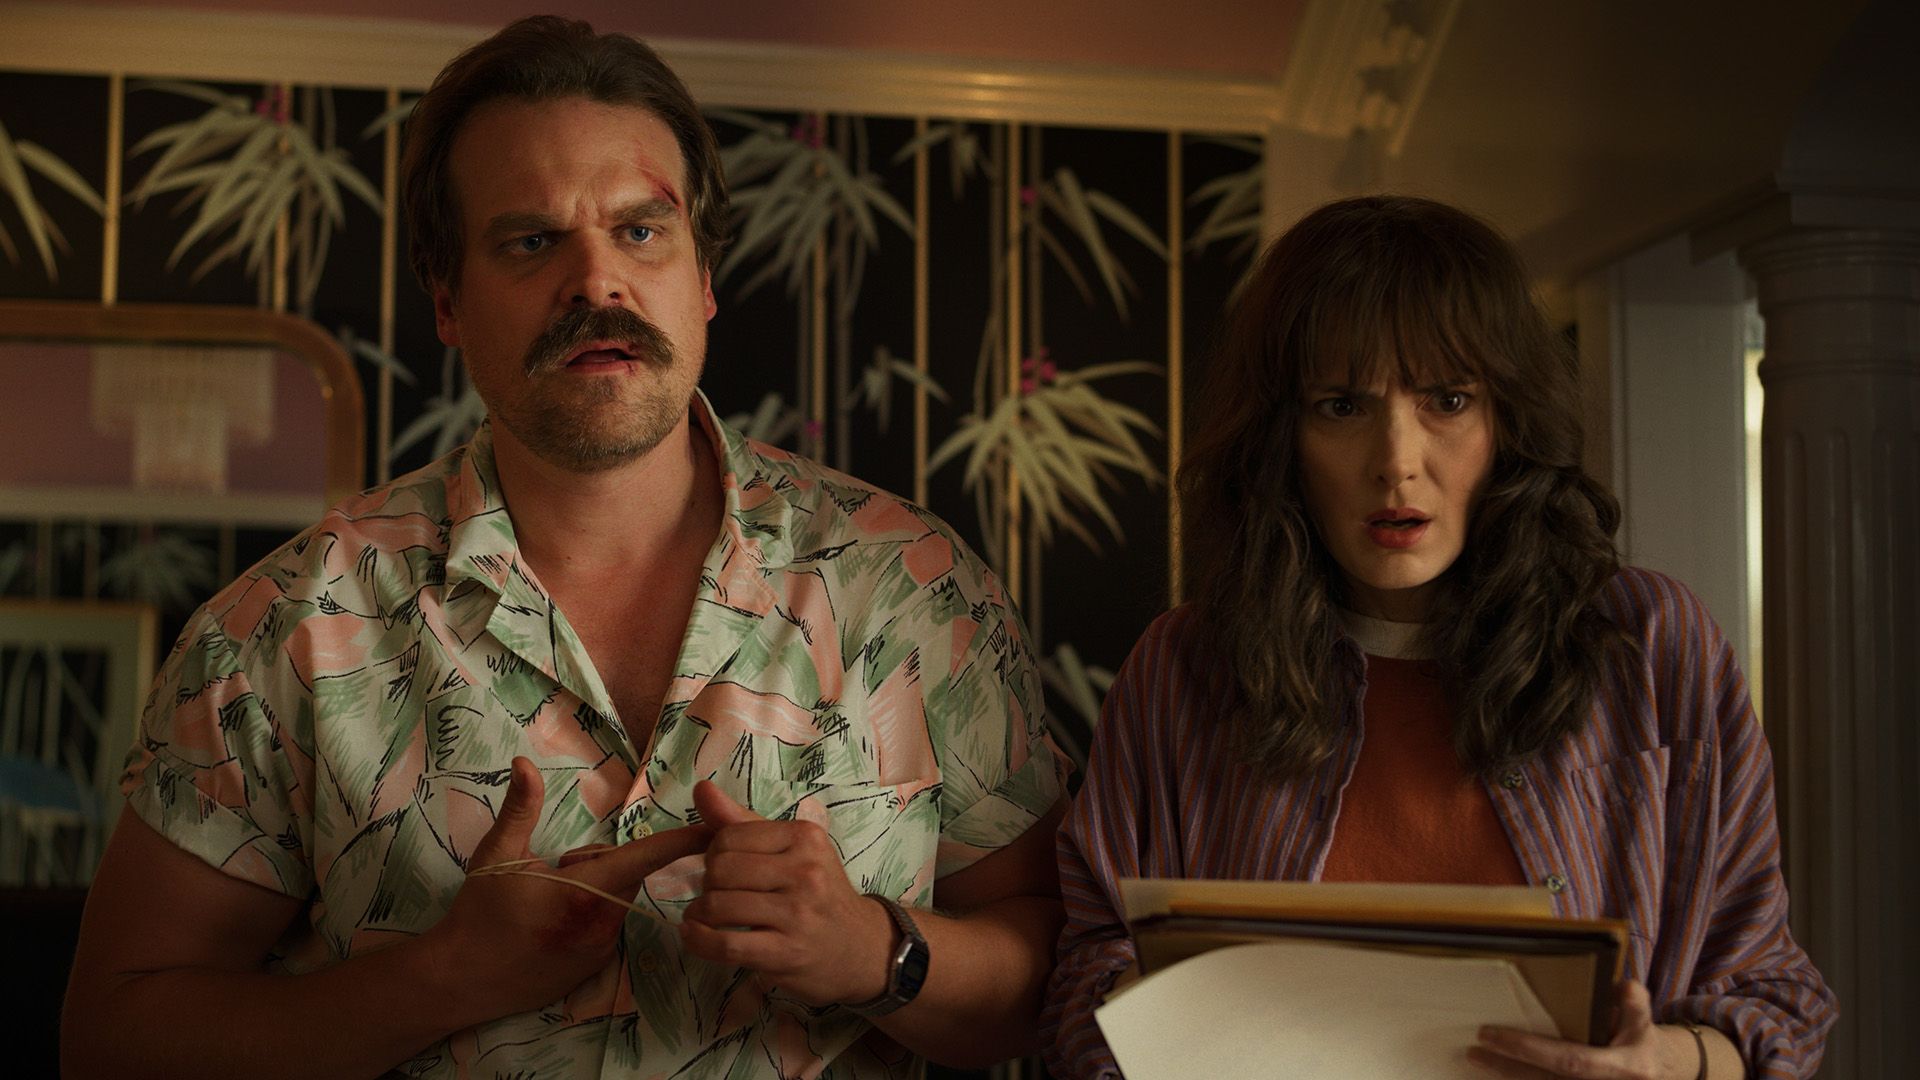 Stranger Things' fans are loving this 1 detail about Hopper in Season 3